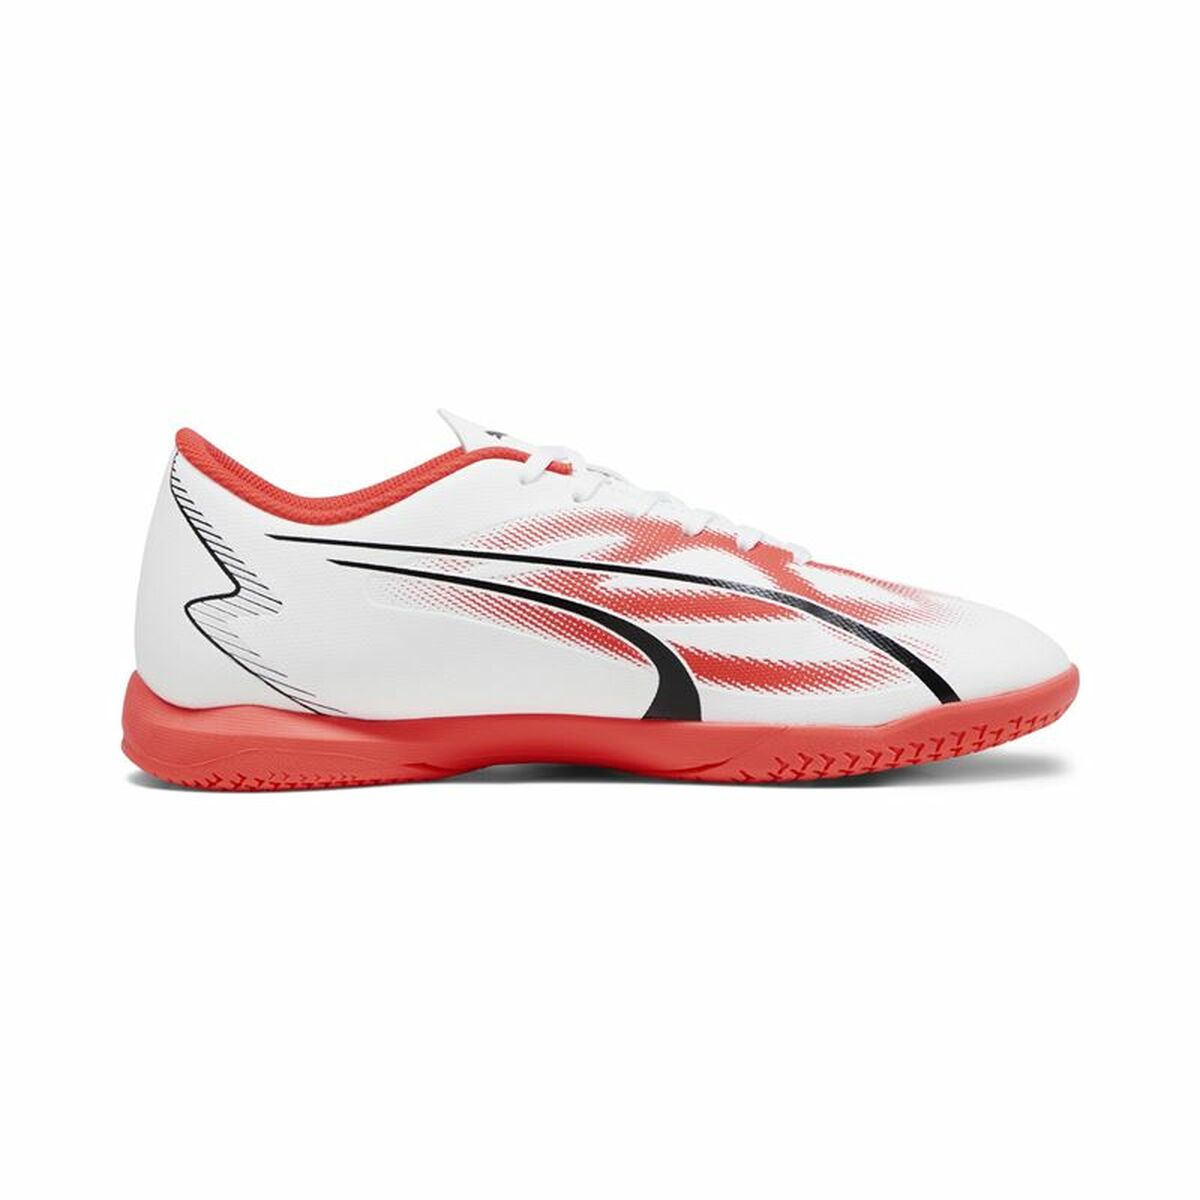 Chaussures de Football pour Adultes Puma Ultra Play It Blanc Rouge